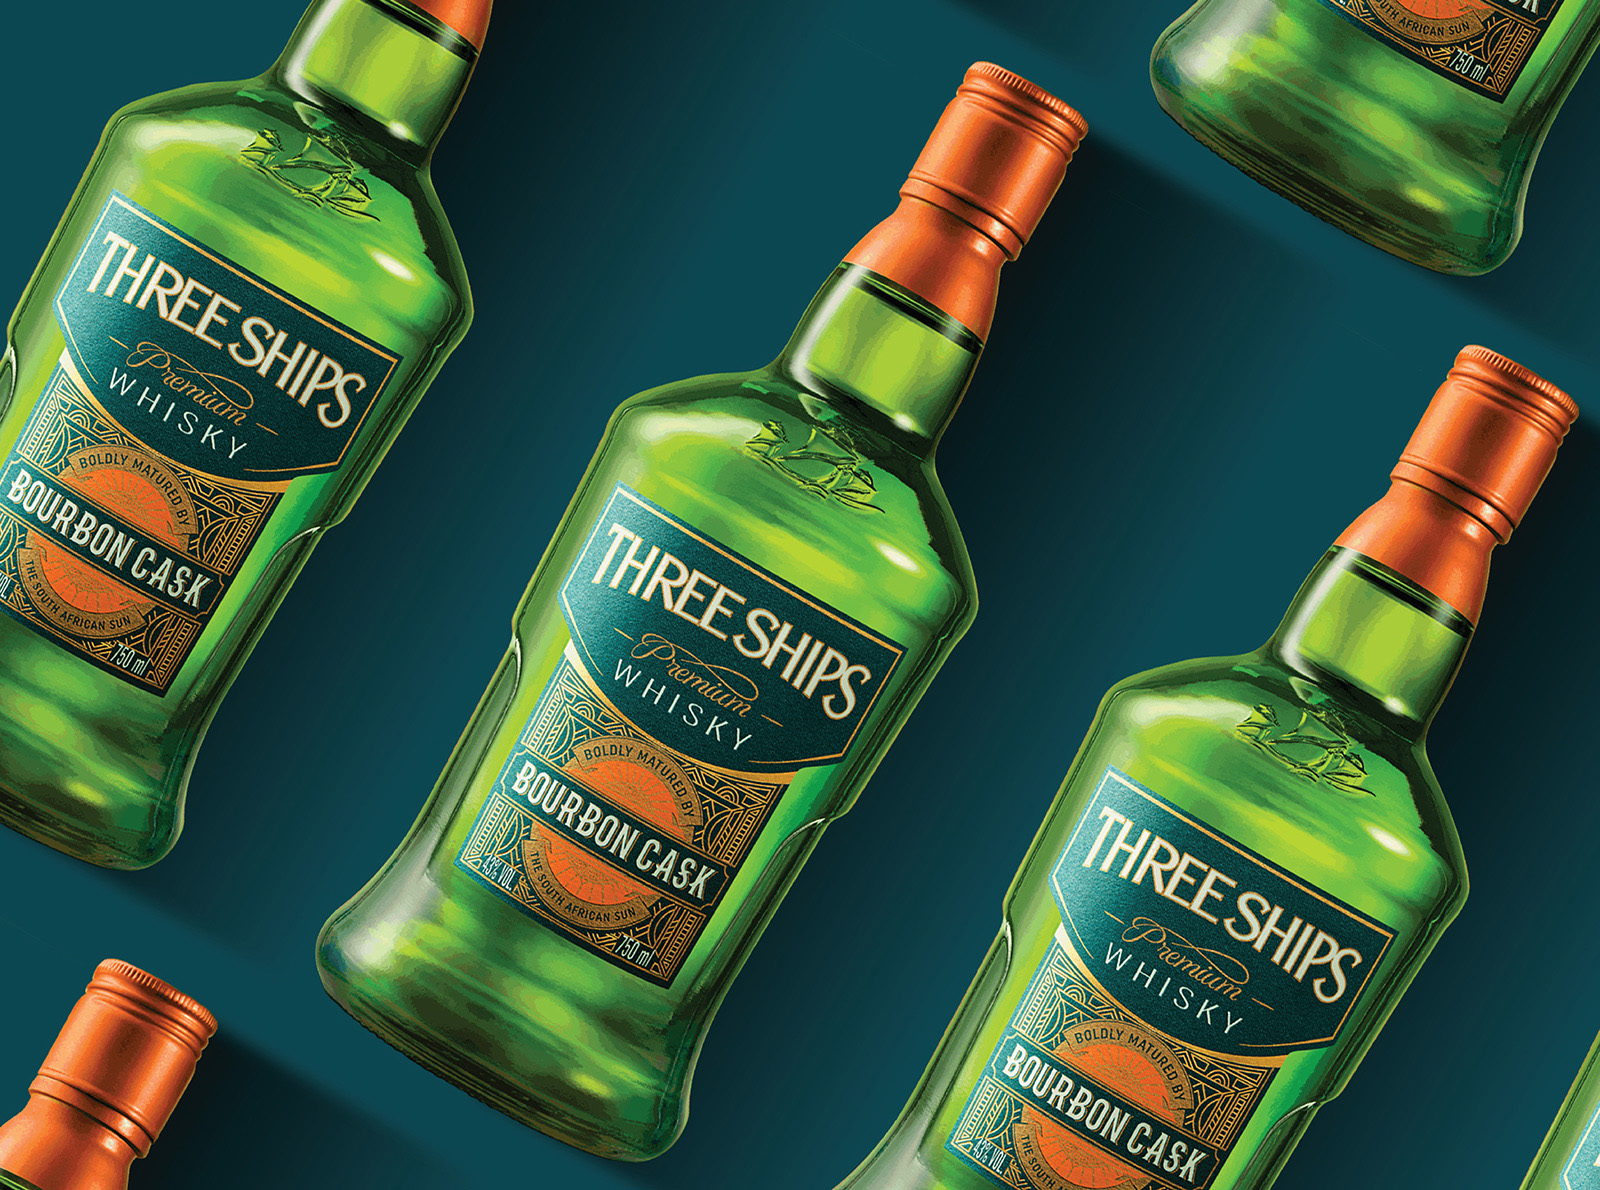 Capturing South Africa’s Spirit, Three Ships Bourbon Cask Packaging Design Revamp Created by Just Design